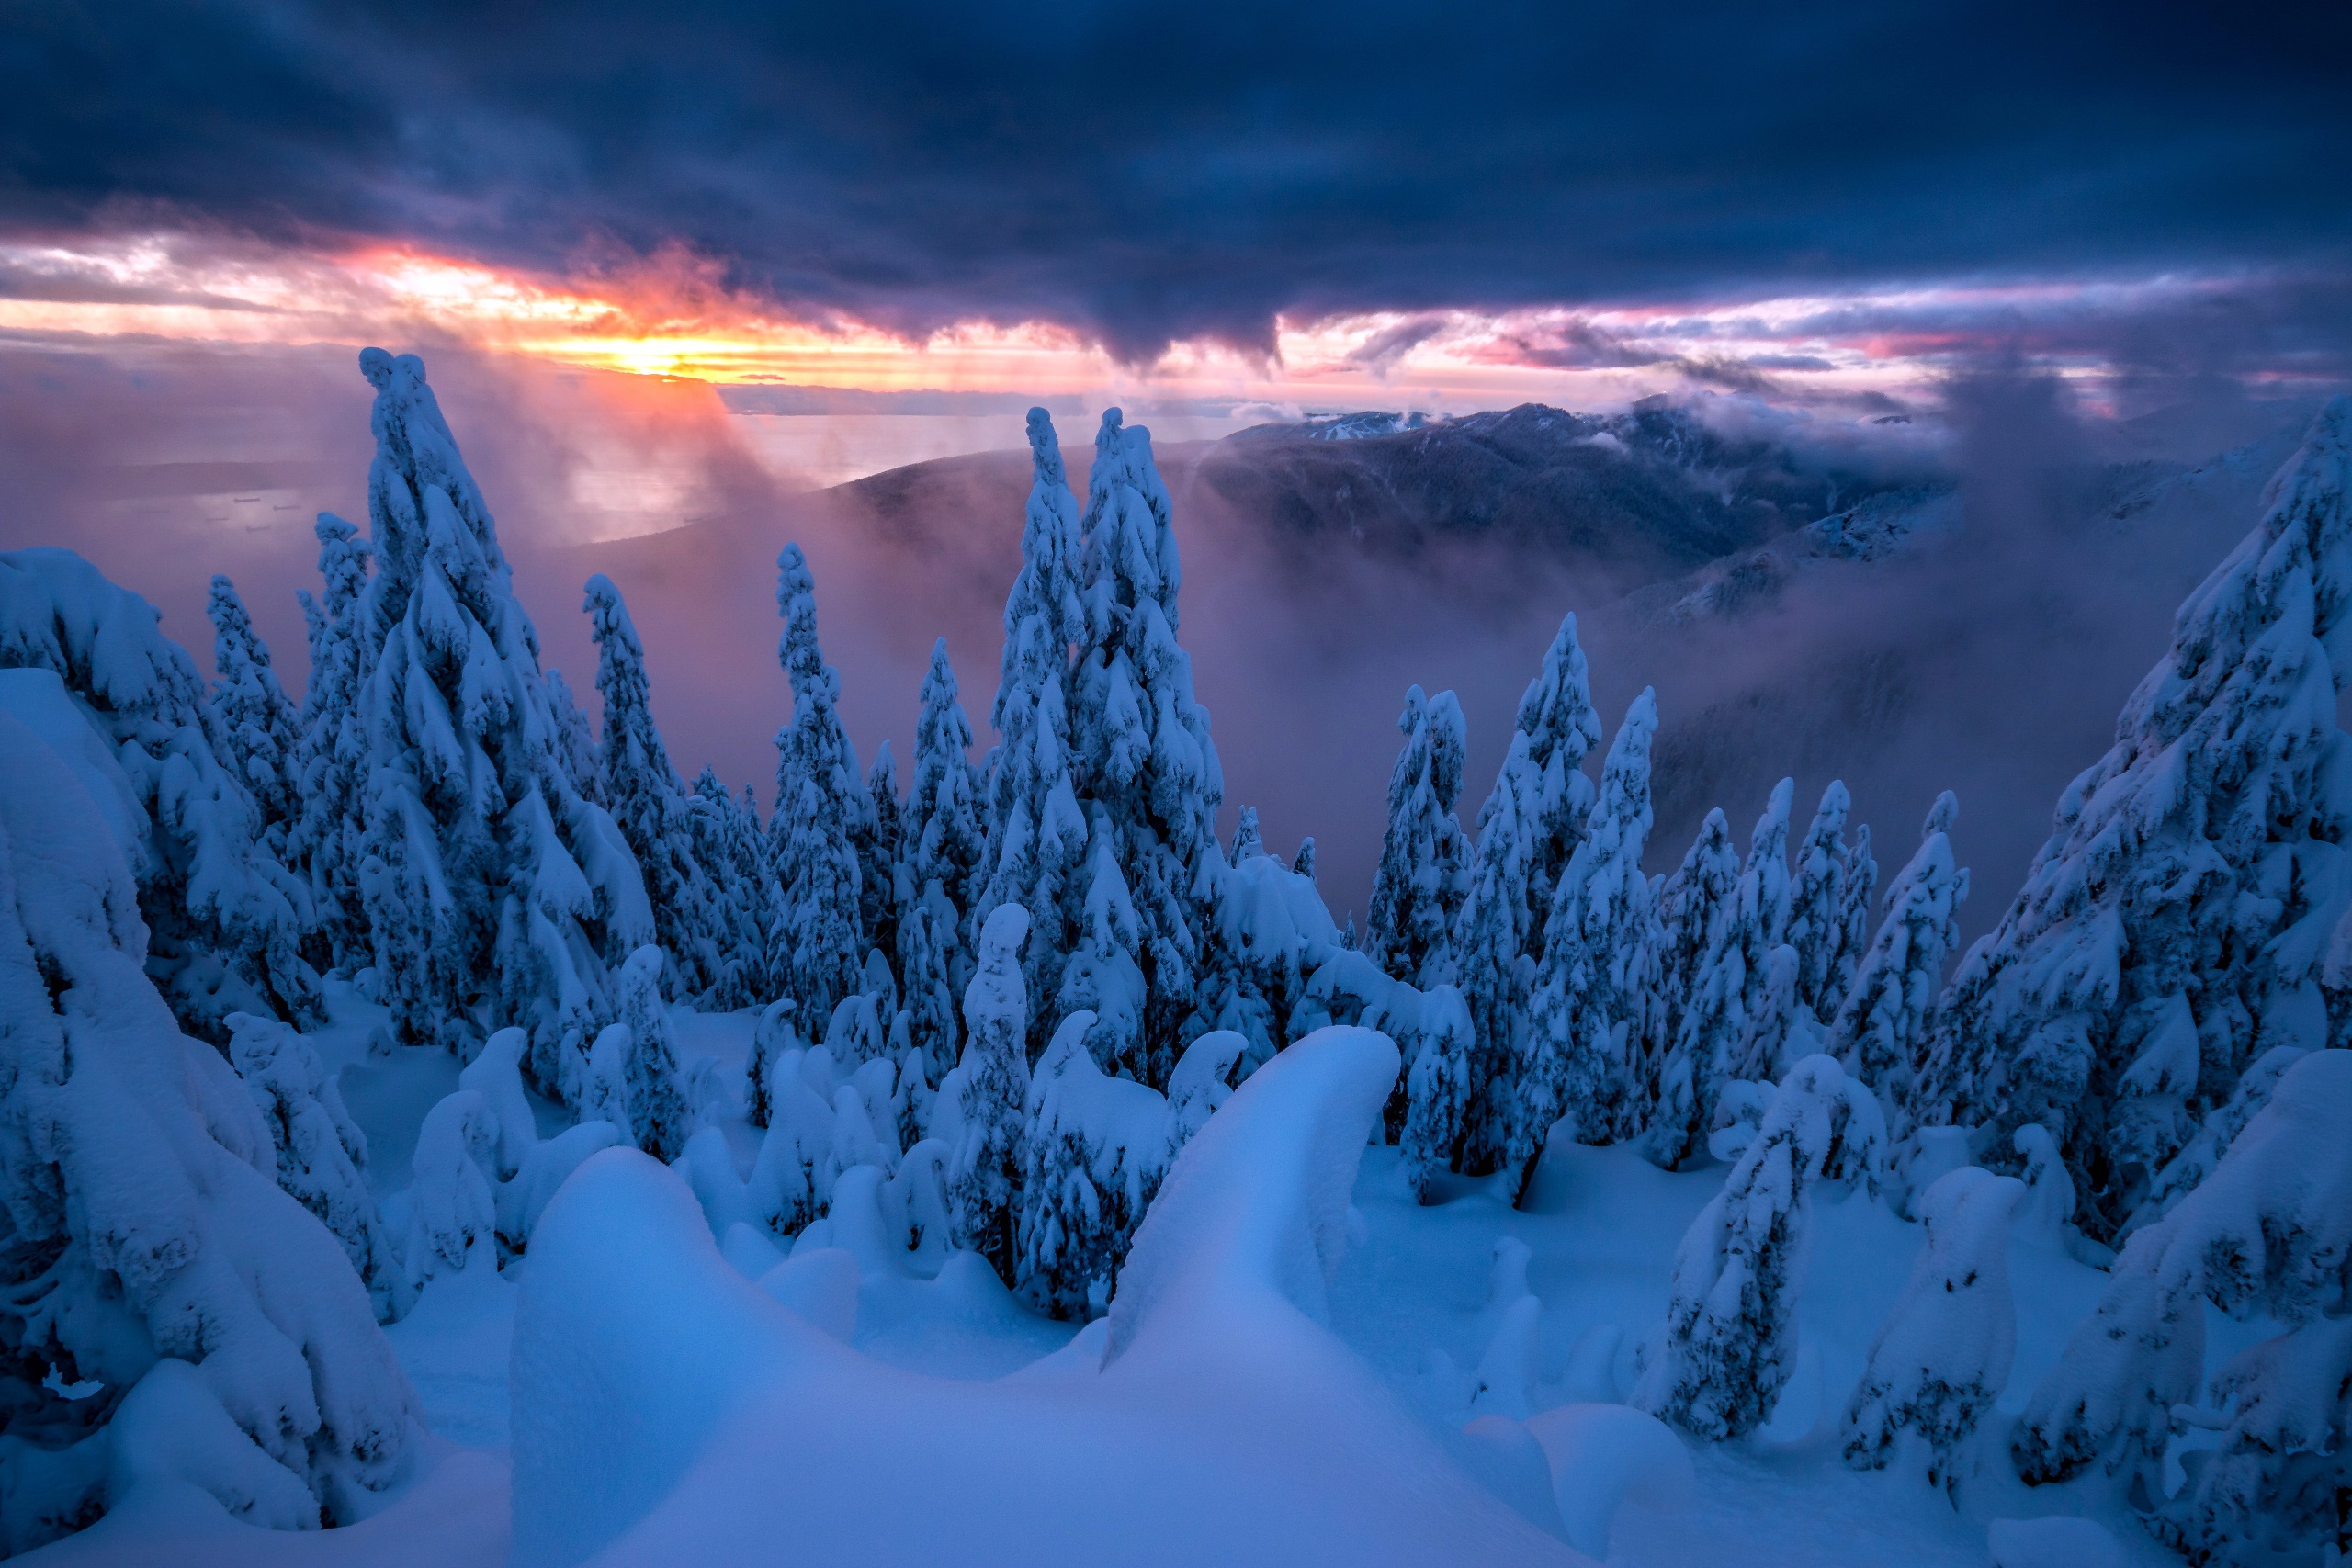 General 2560x1707 nature sky trees winter snow